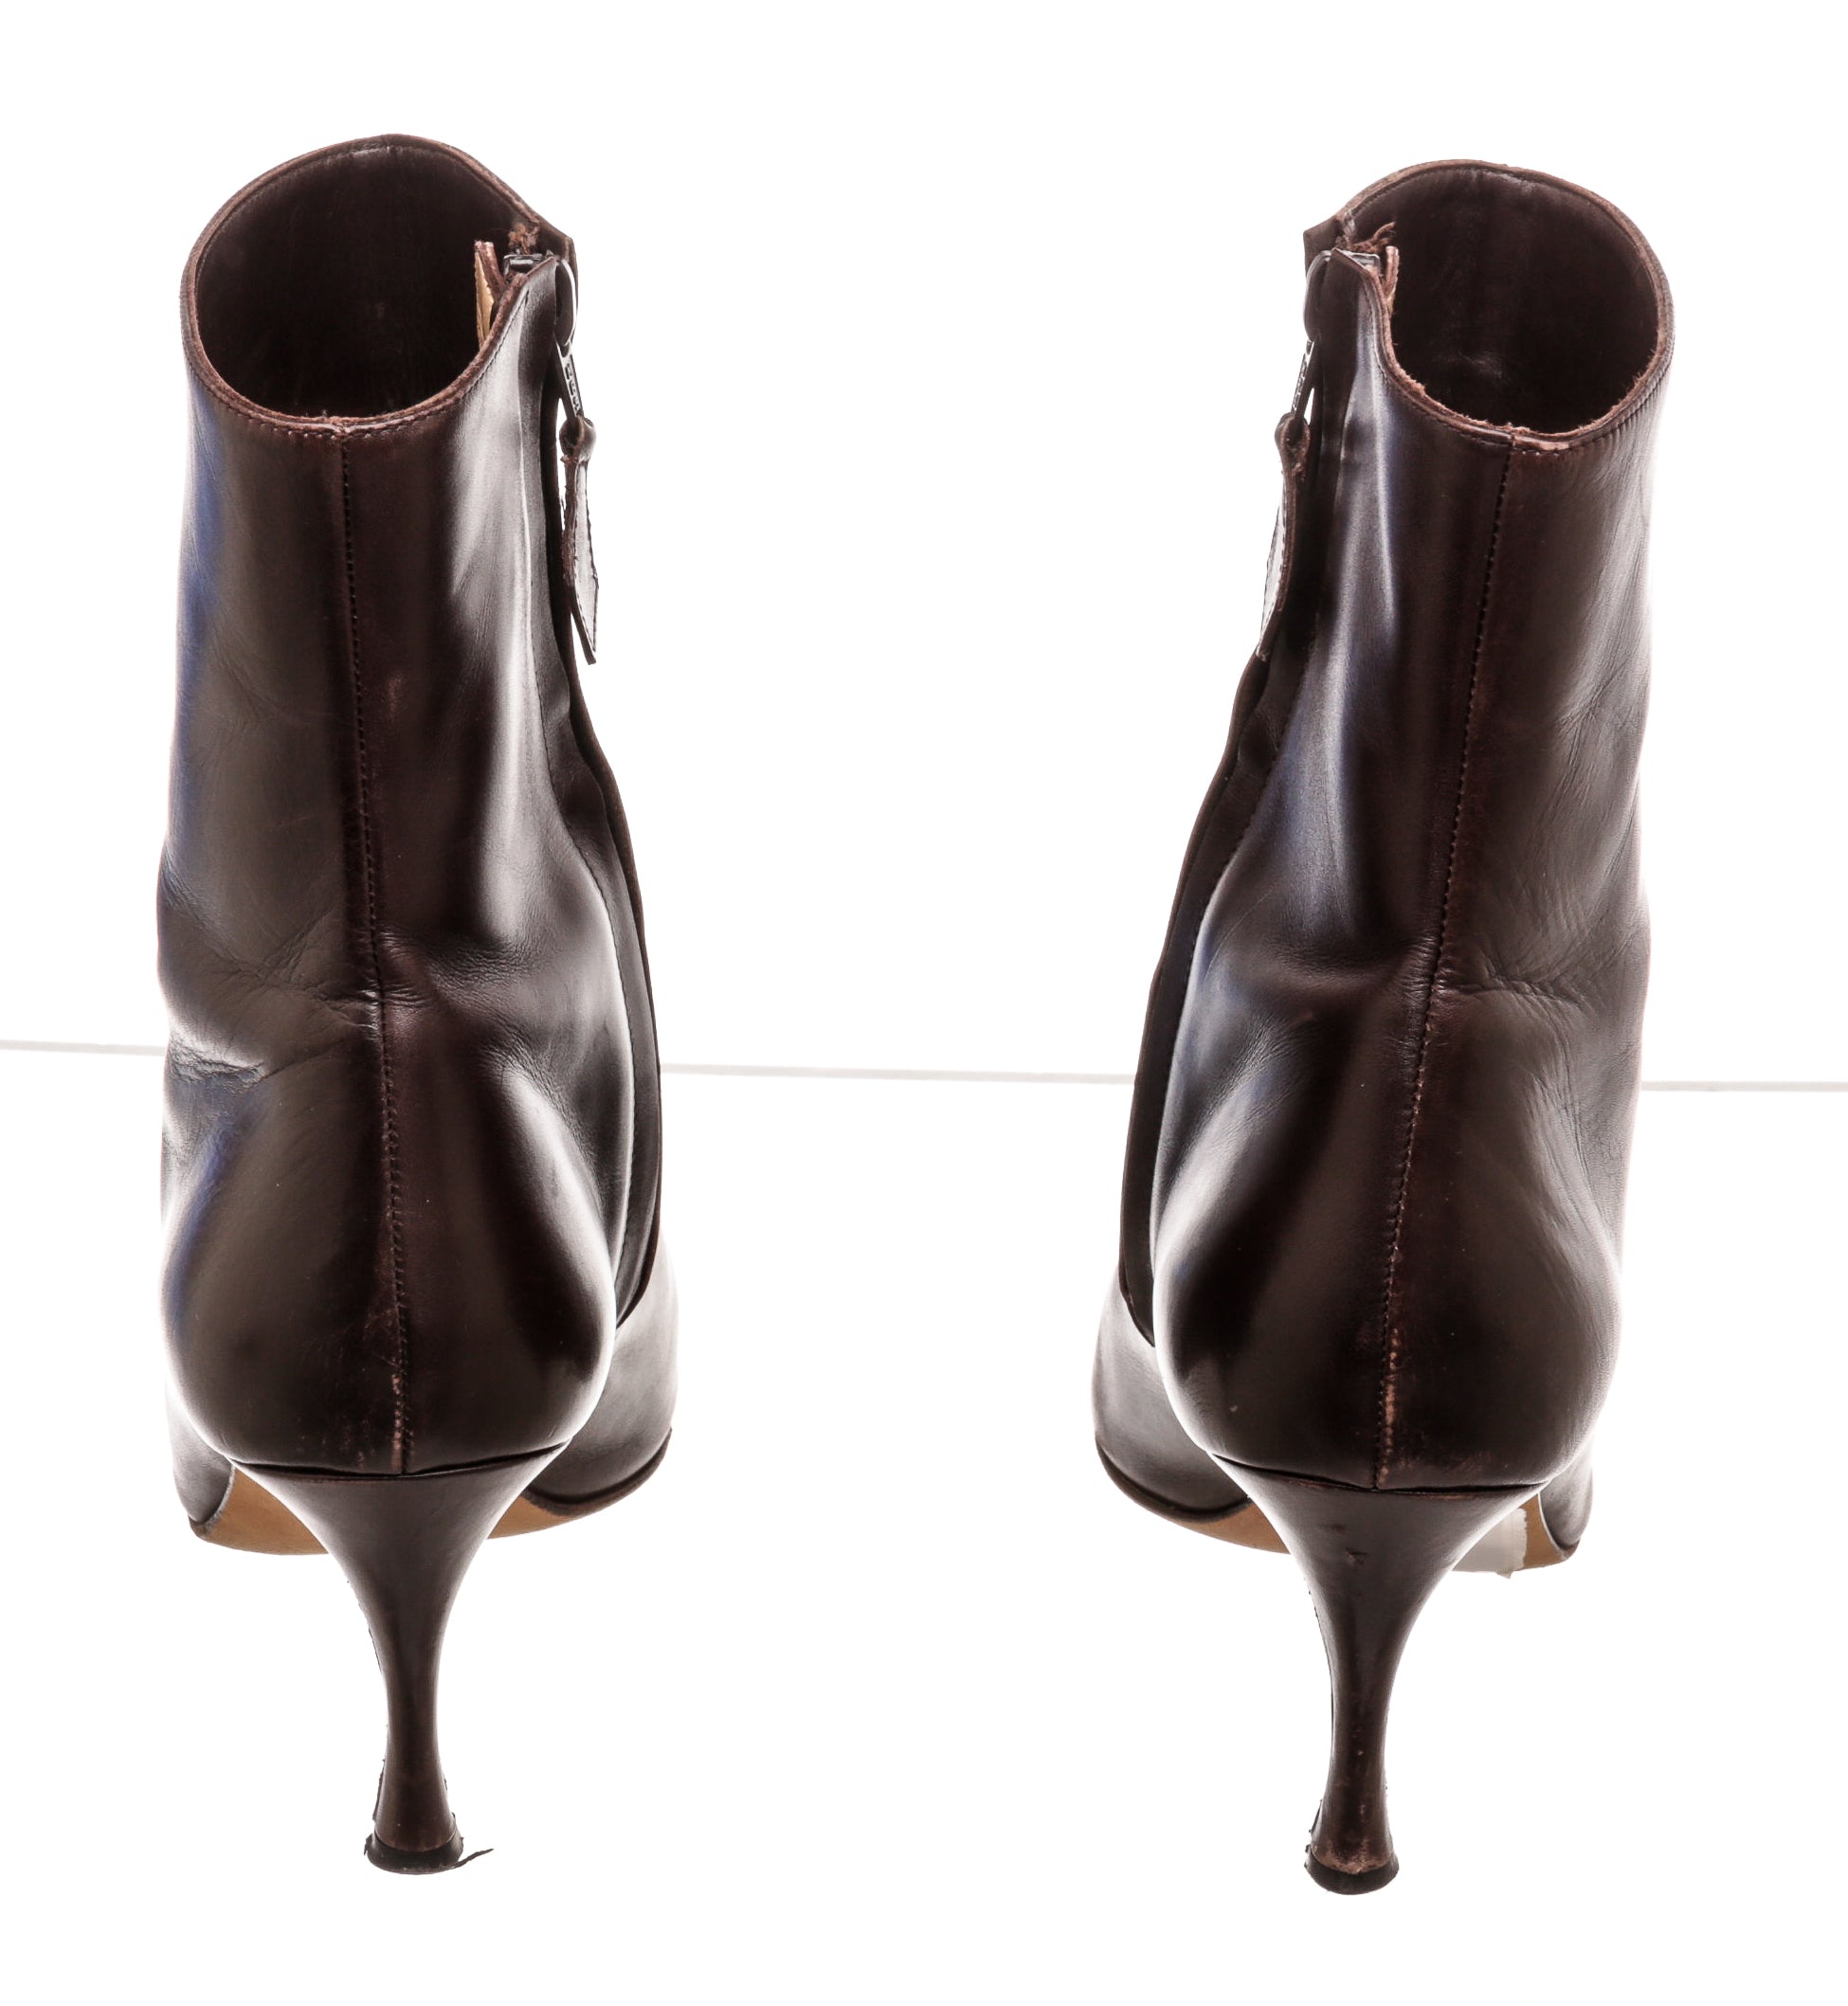 Manolo Blahnik Brown Leather Boots Size 38.5